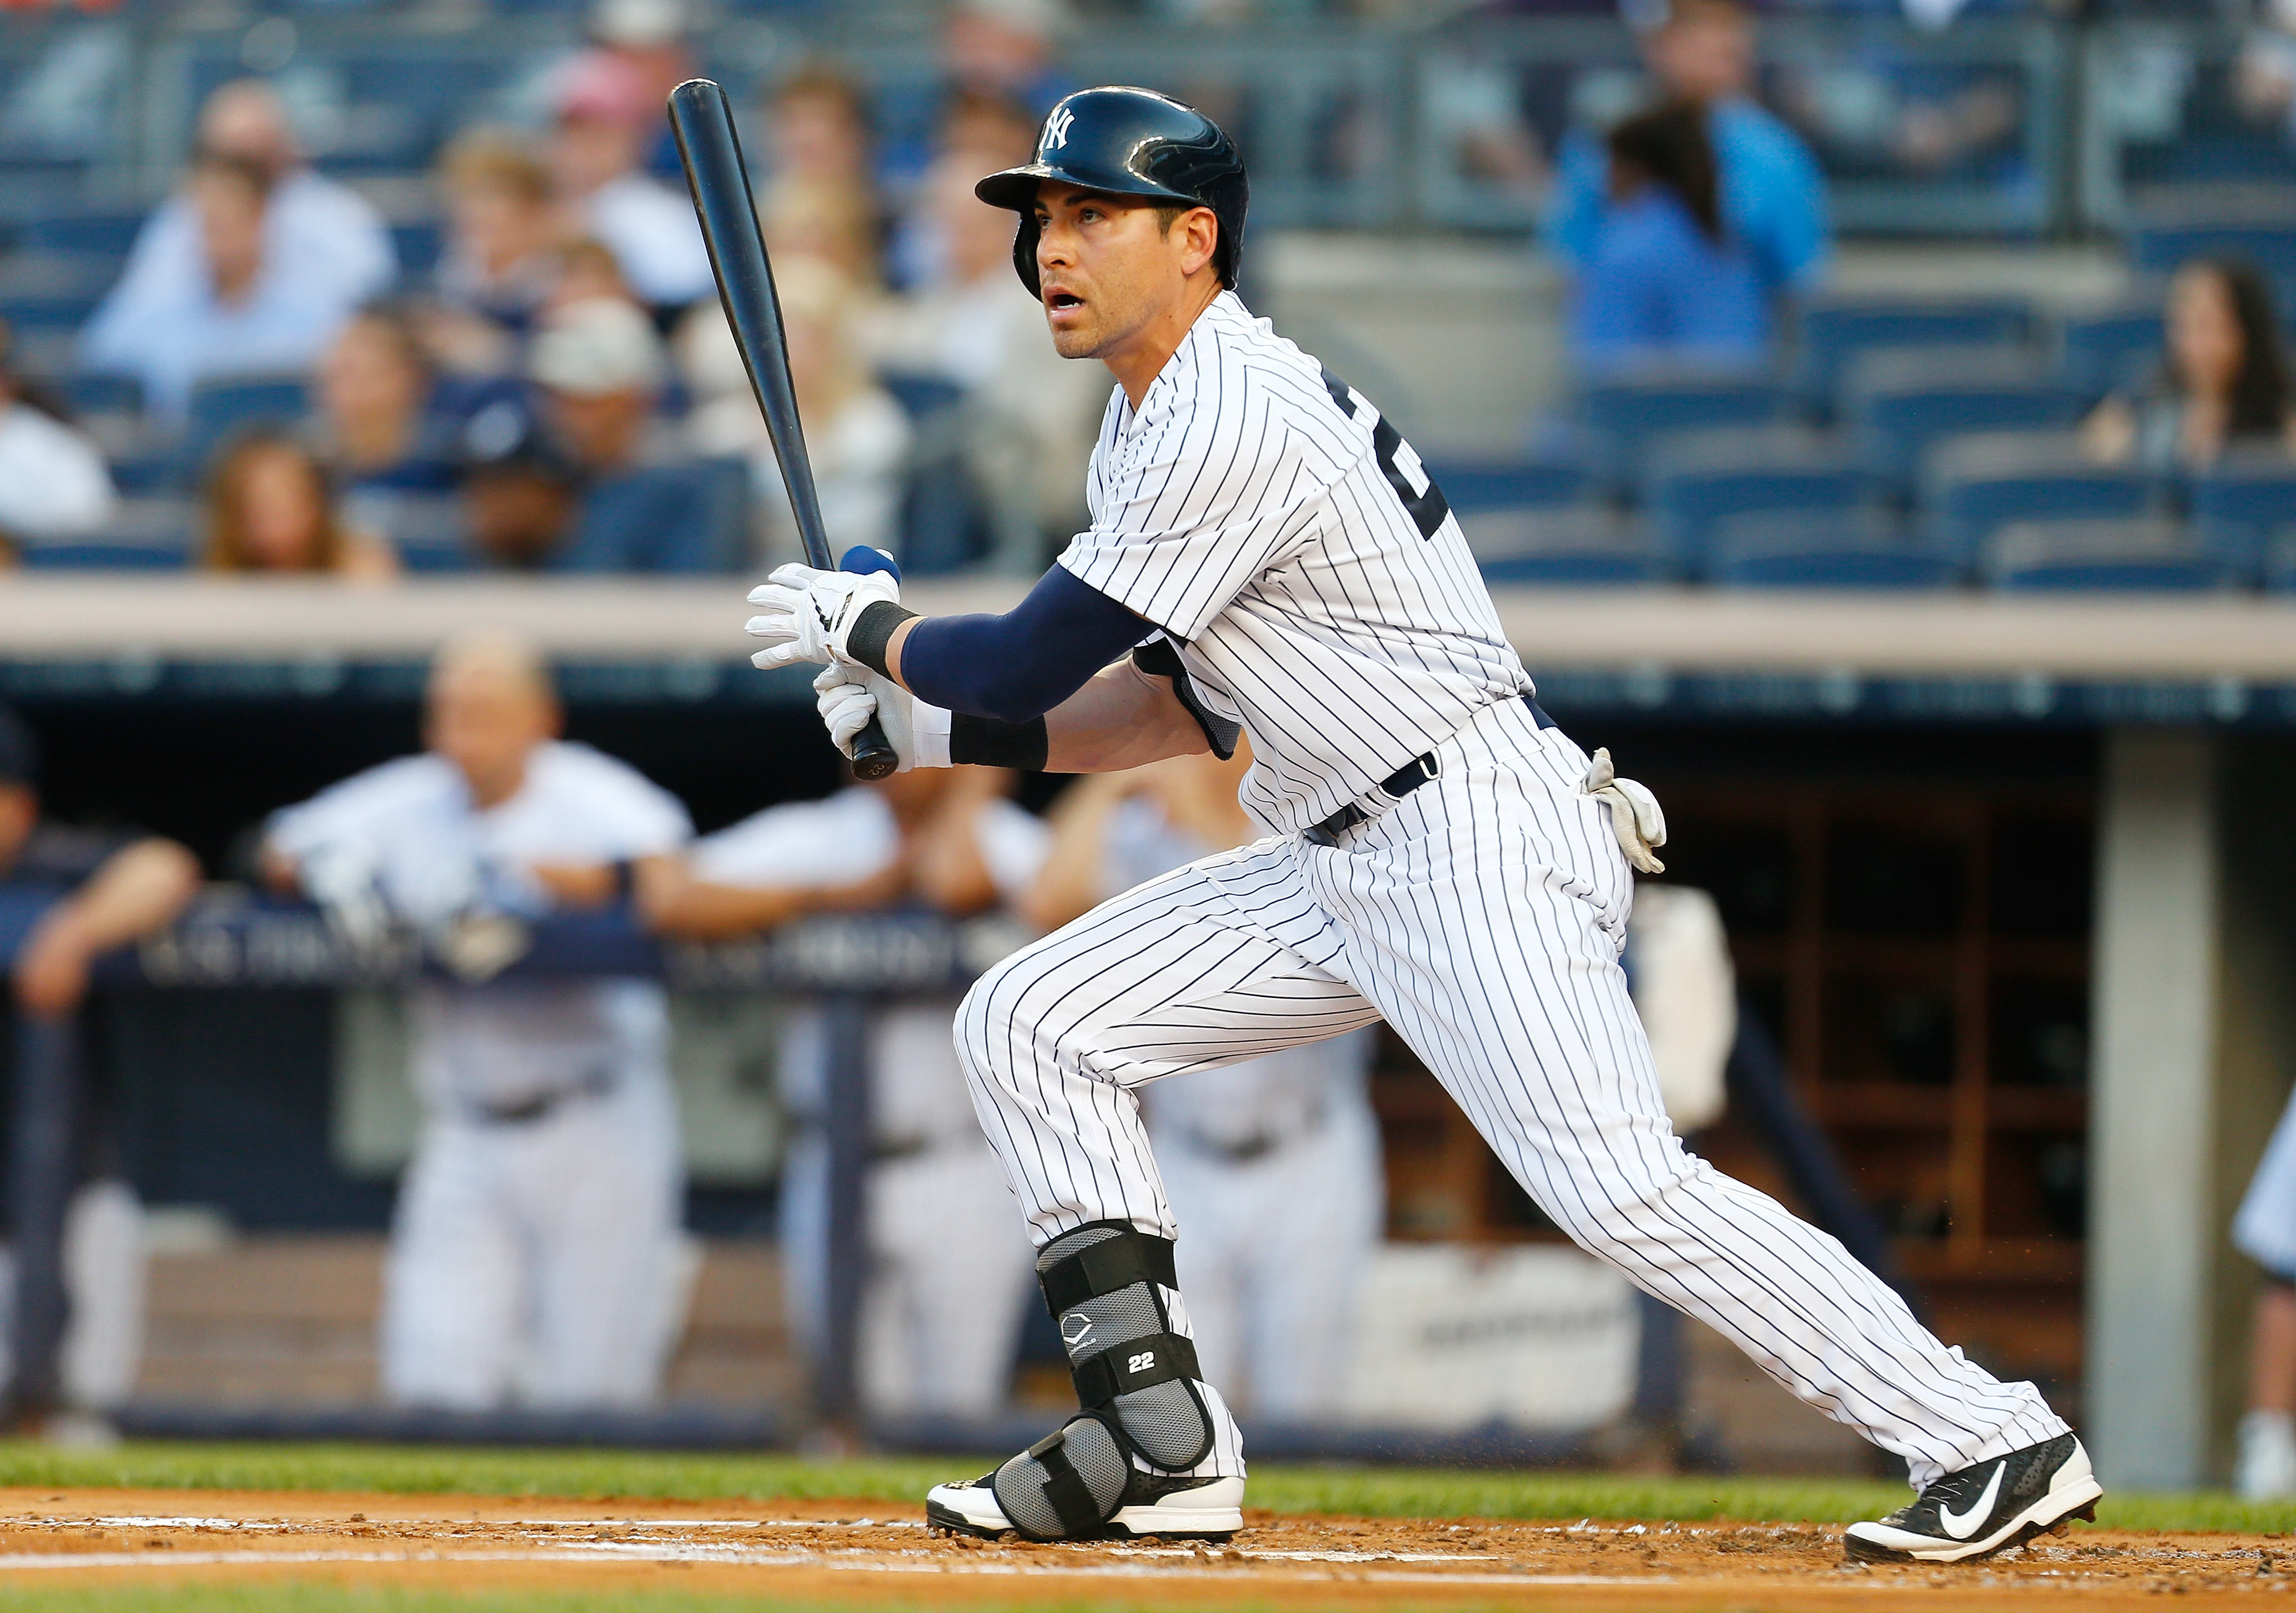 Three Ways the Yankees Could Dump Jacoby Ellsbury This Winter